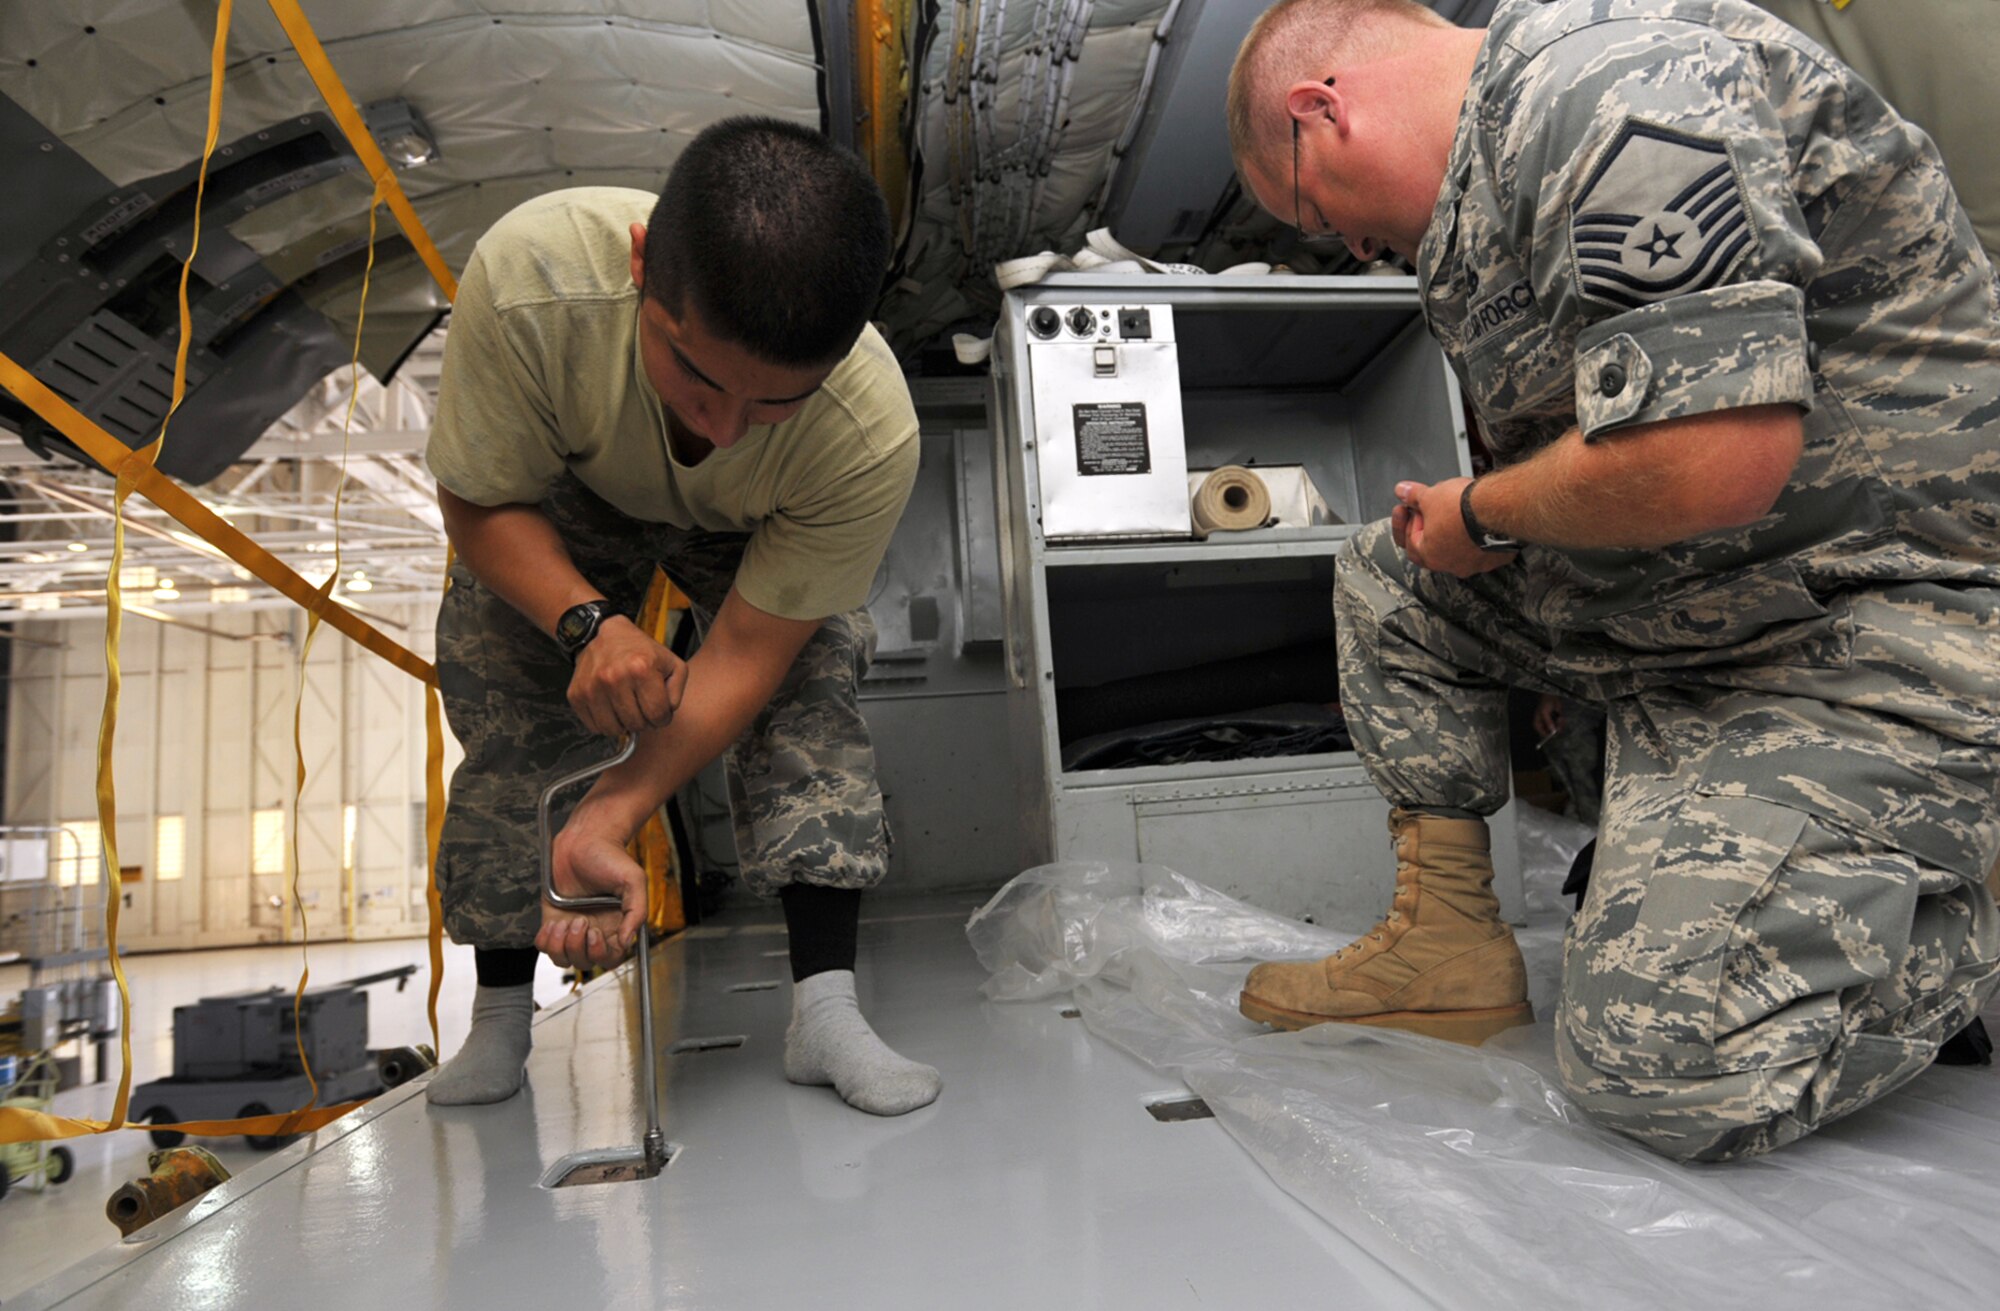 Senior Airman Gilberto Rodriguez-Martinez (on left) works in his socks and Master Sgt. Al Ryder steps on plastic to protect a new coat of paint to the floor of a KC-135 Stratotanker scheduled for competitions at Air Mobility Rodeo 2009. Both maintainers are assigned to a "blended" team of Reserve and Regular (active-duty) Airmen preparing to represent McConnell Air Force Base, Kan., as a total force at the biennial readiness competition. Sergeant Ryder is a Reservist assigned to the 931st Aircraft Maintenance Squadron. Airman Rodriguez-Martinez is an active-duty Airman assigned to the 22nd Aircraft Maintenance Squadron. (U.S. Air Force photo/Tech. Sgt. Jason Schaap)